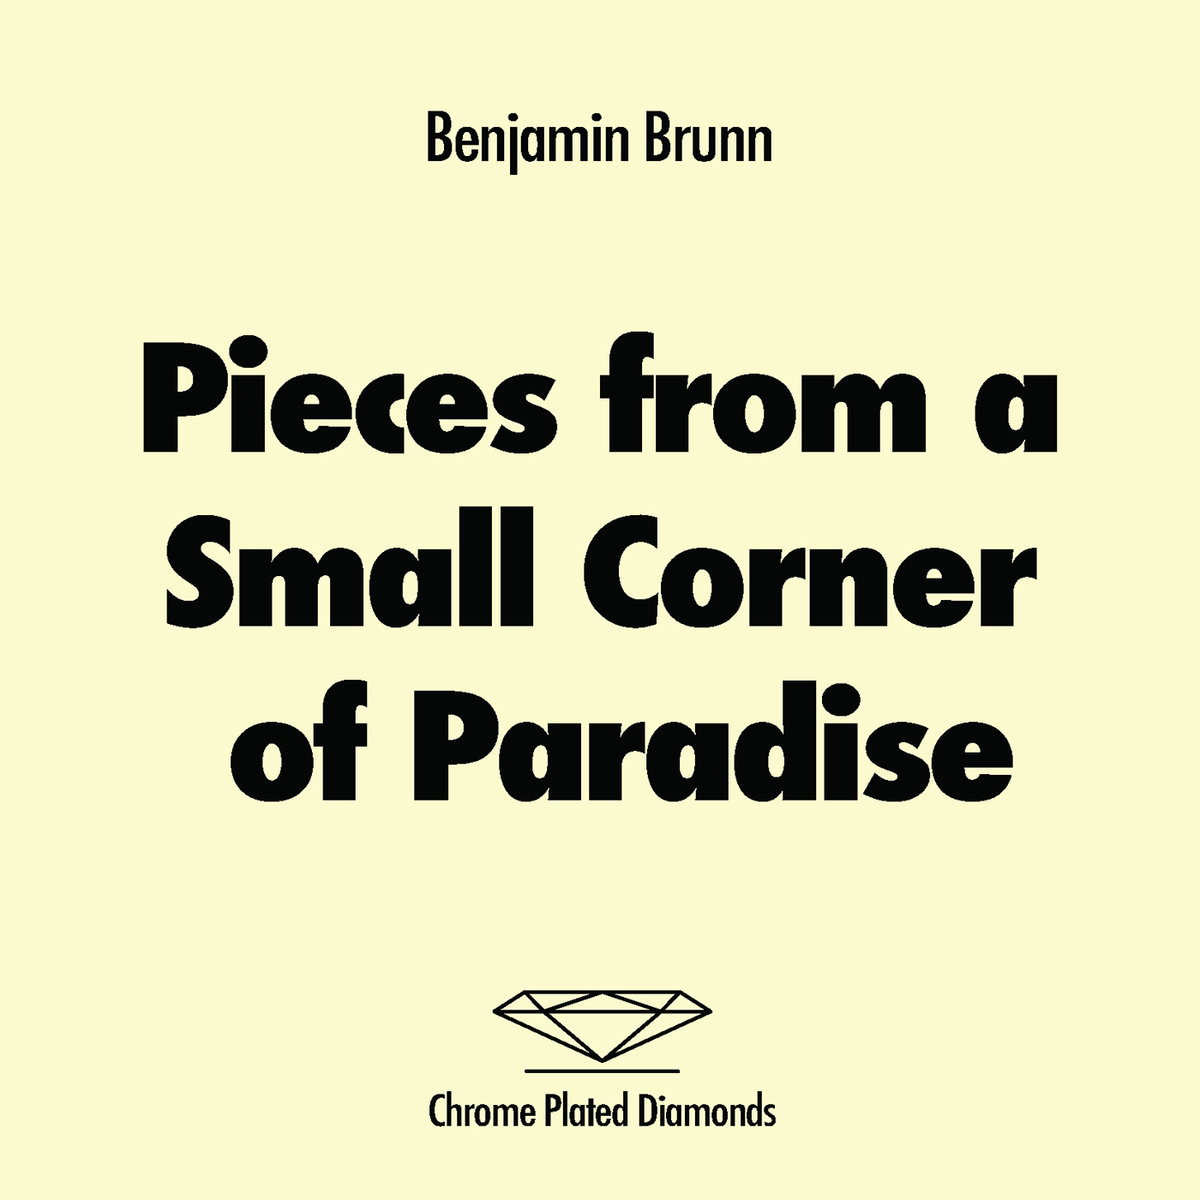 Benjamin Brunn – Pieces from a Small Corner of Paradise